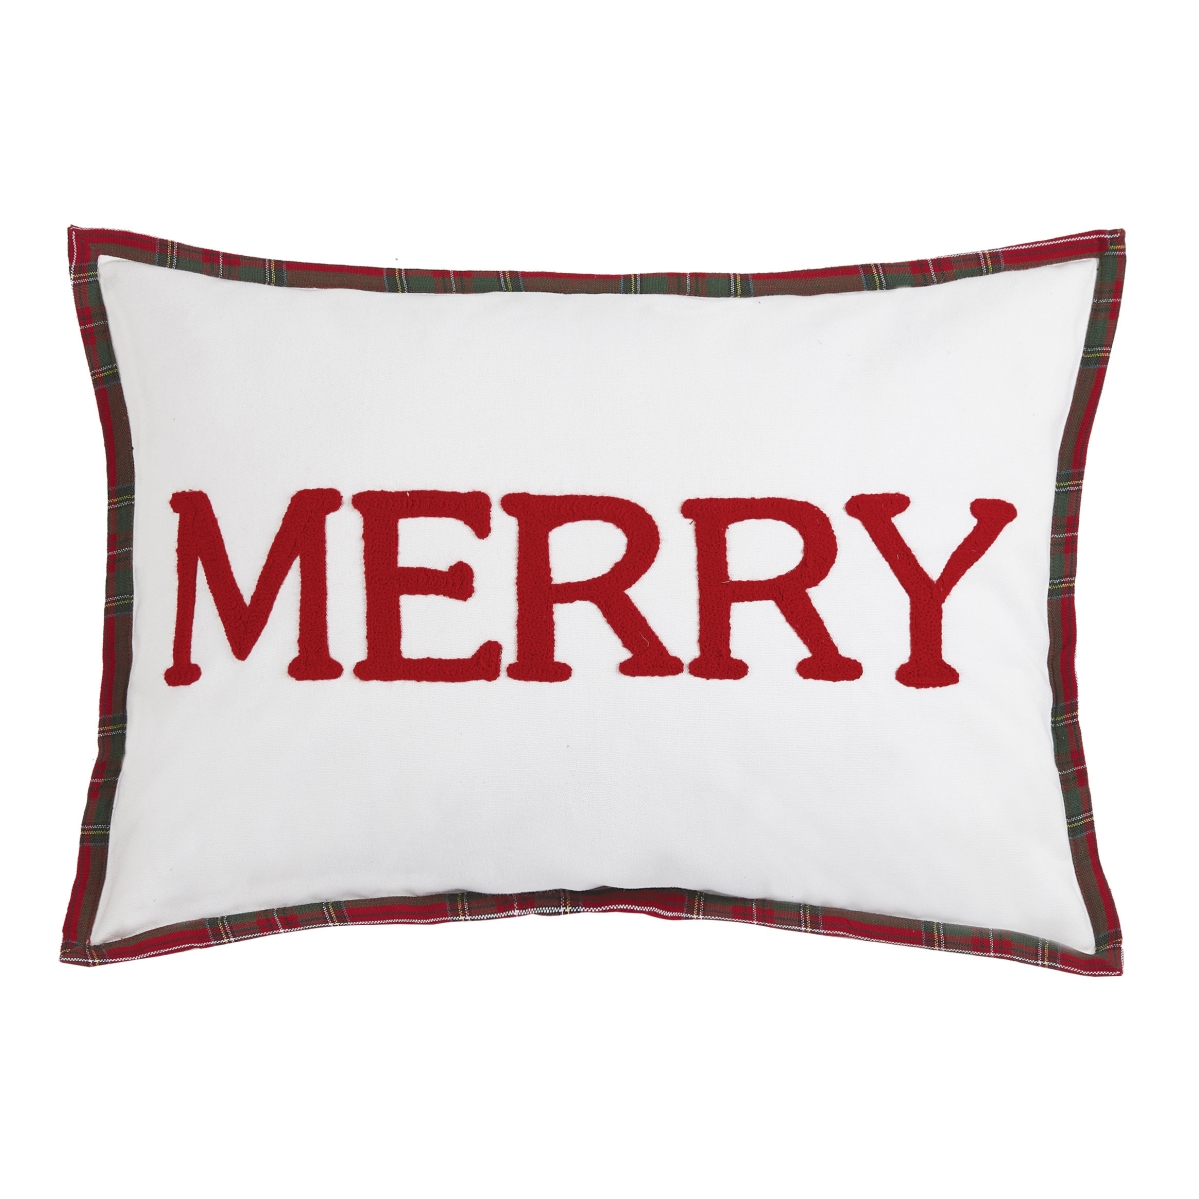 Picture of Peking Handicraft 31PK1029C20OB 14 x 20 in. Merry Embroidered Poly Filled Pillow